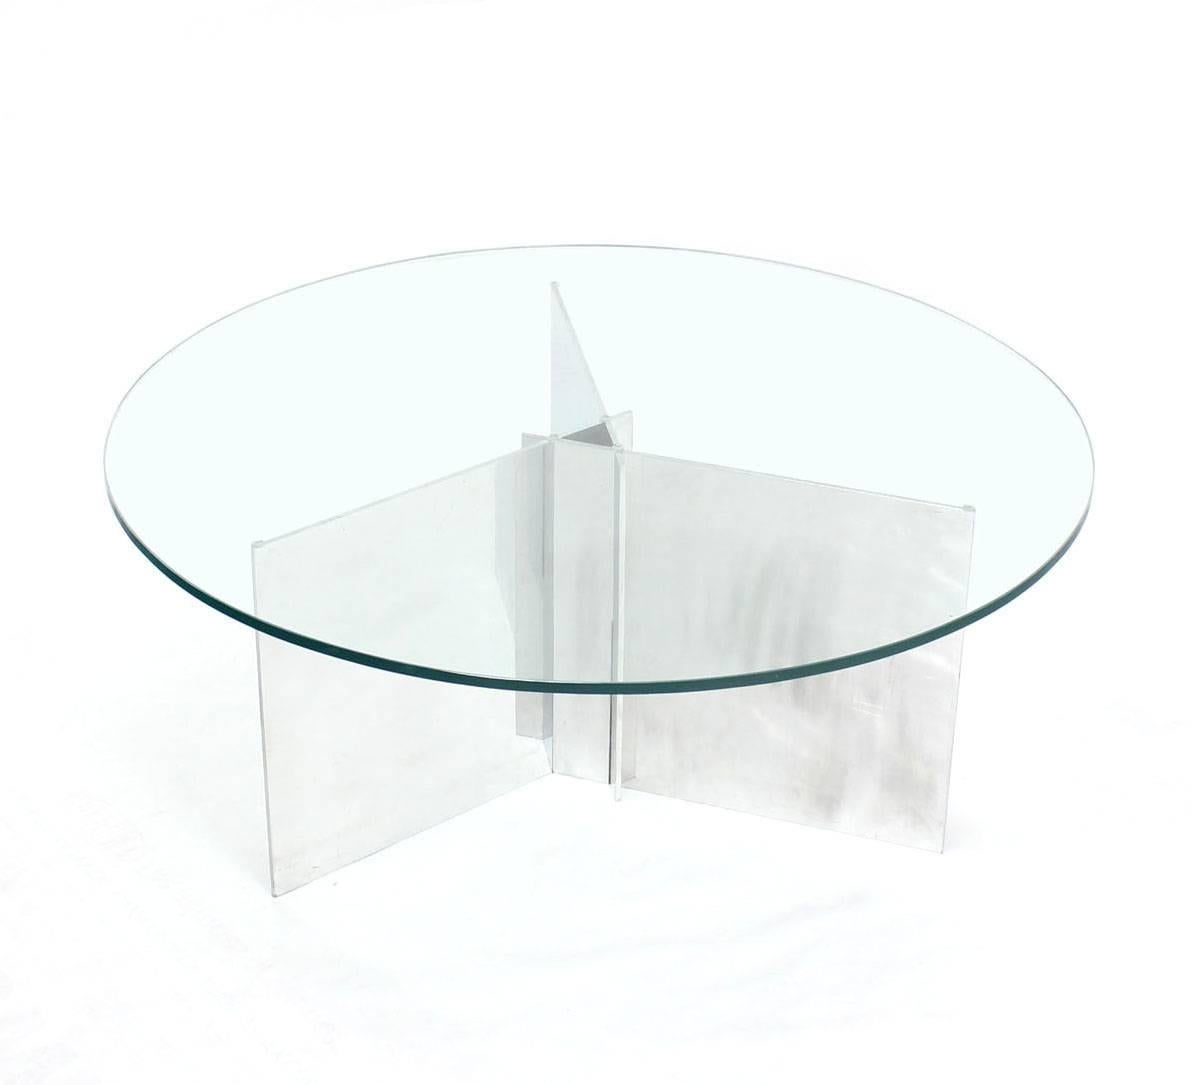 Aluminum interlocking blades base coffee table with glass top.